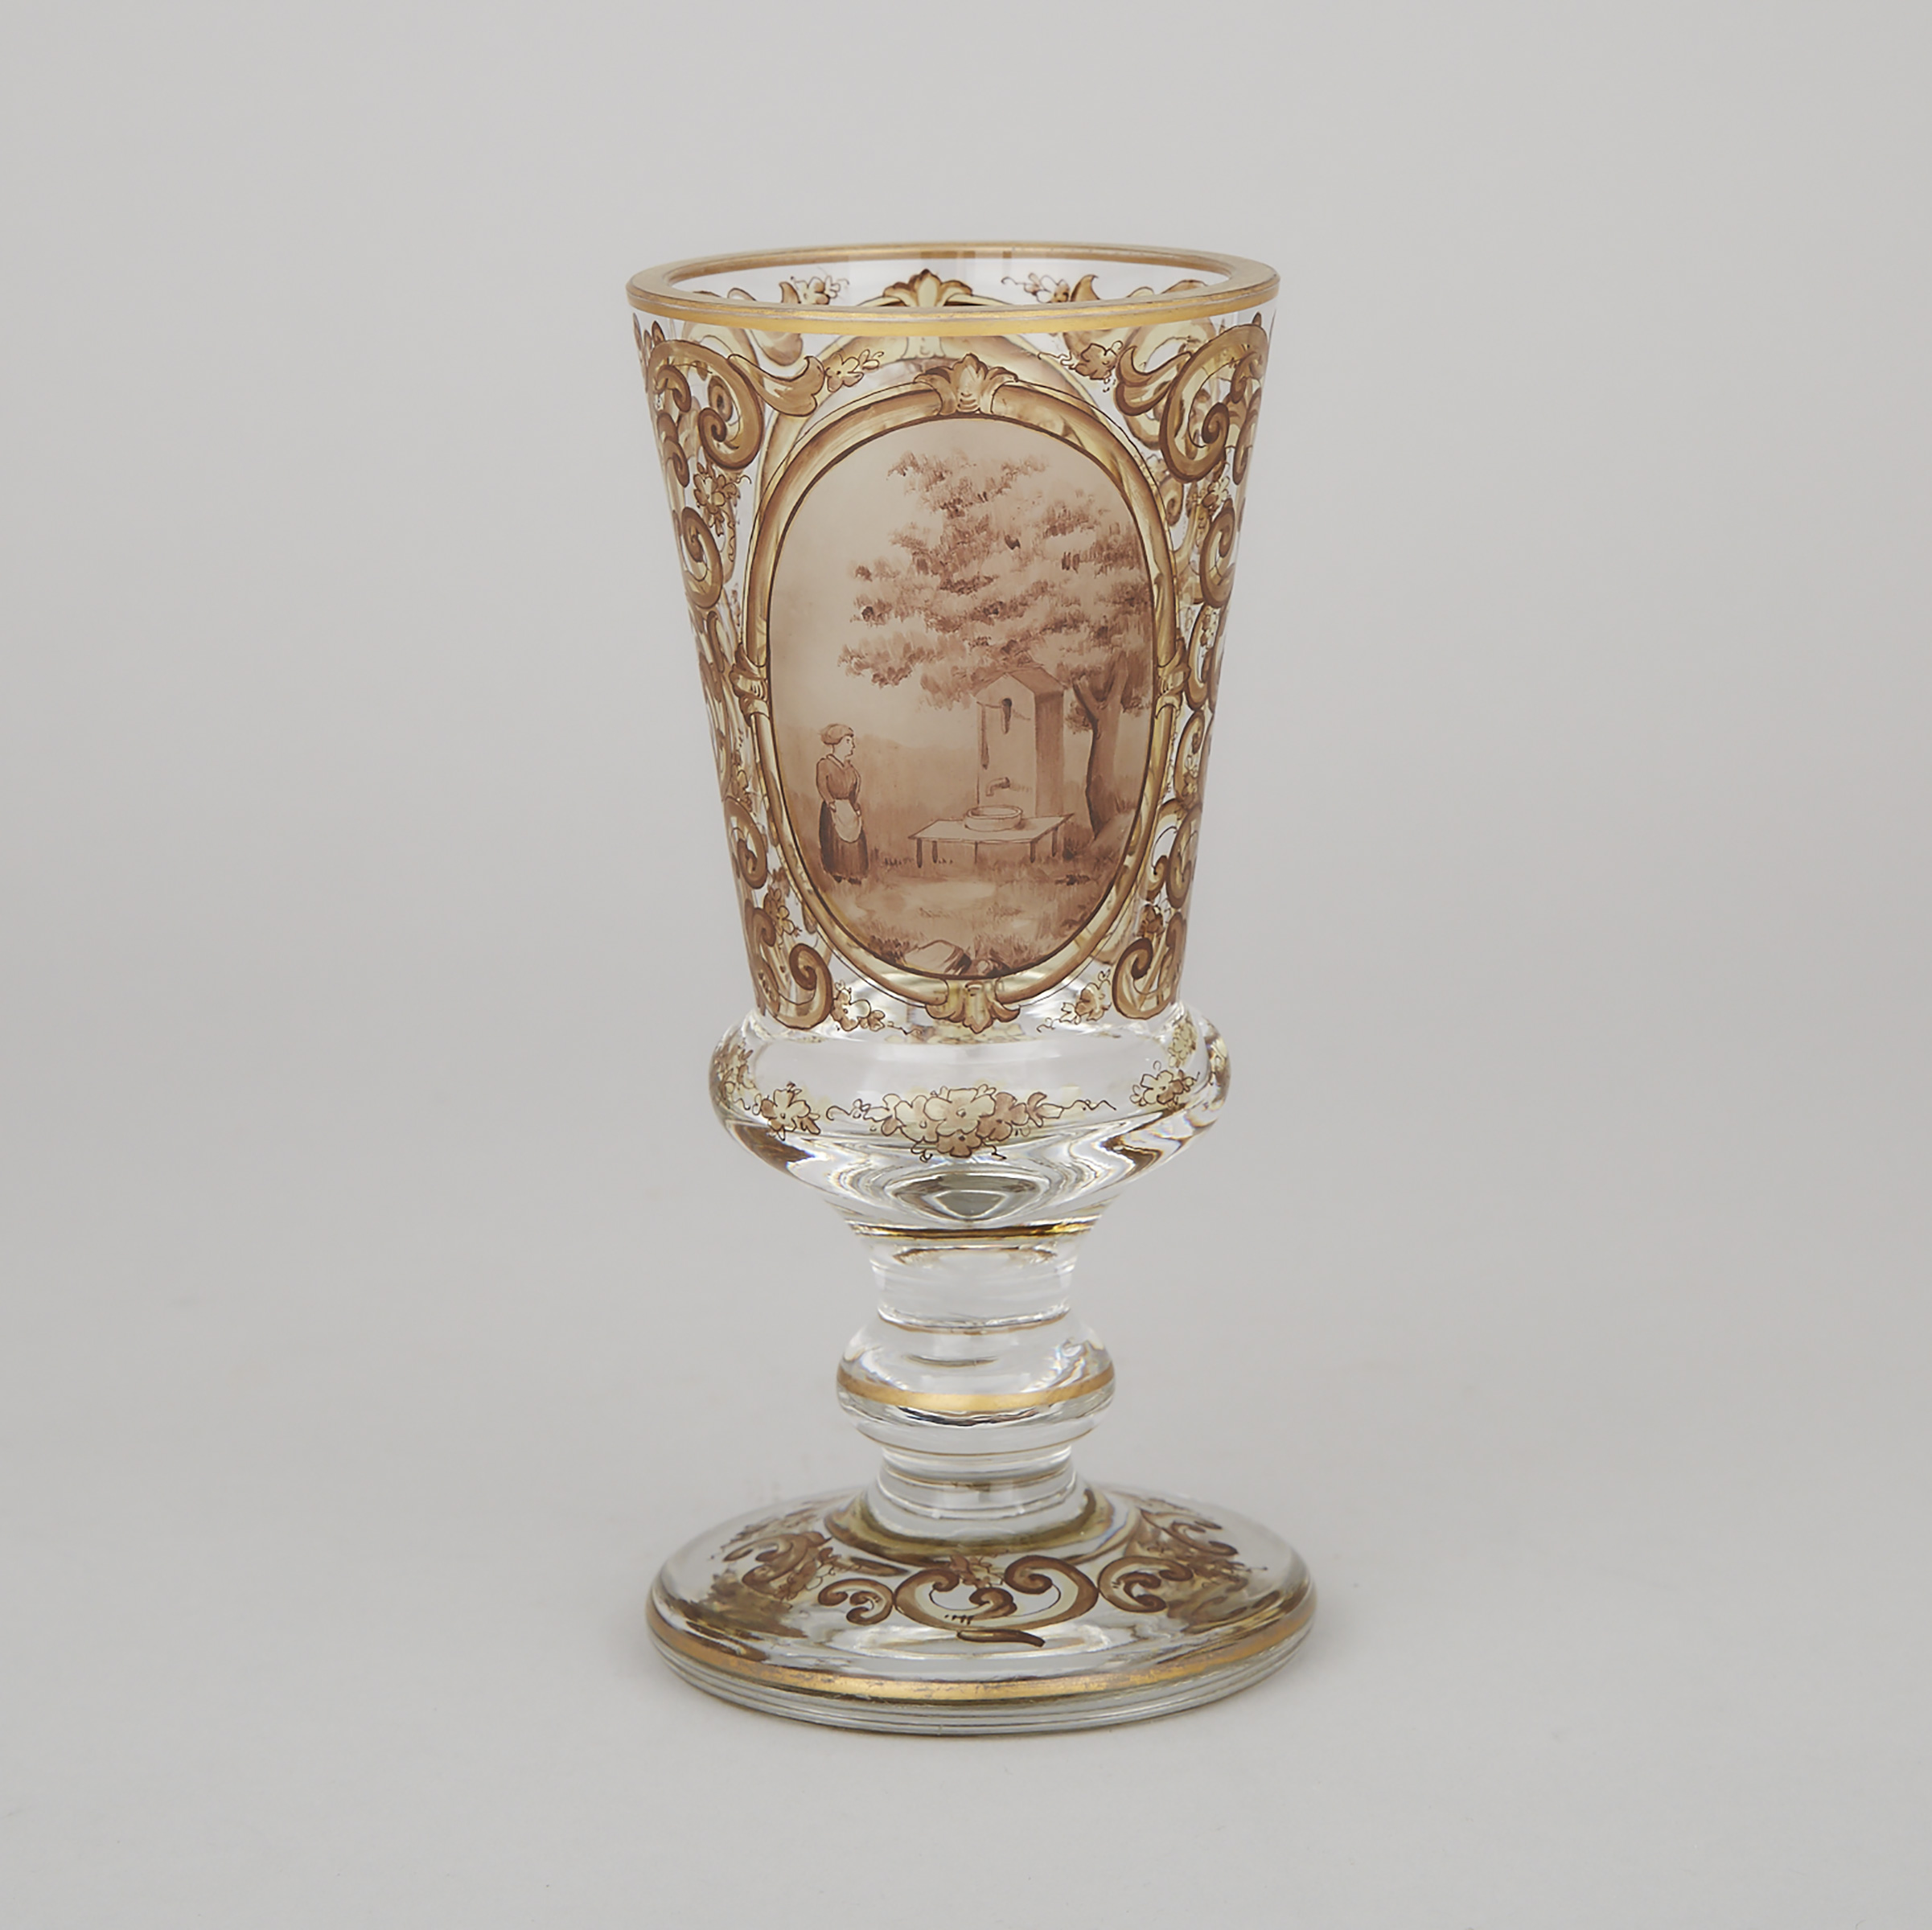 Bohemian Enameled and Gilt Glass Goblet, mid-19th century